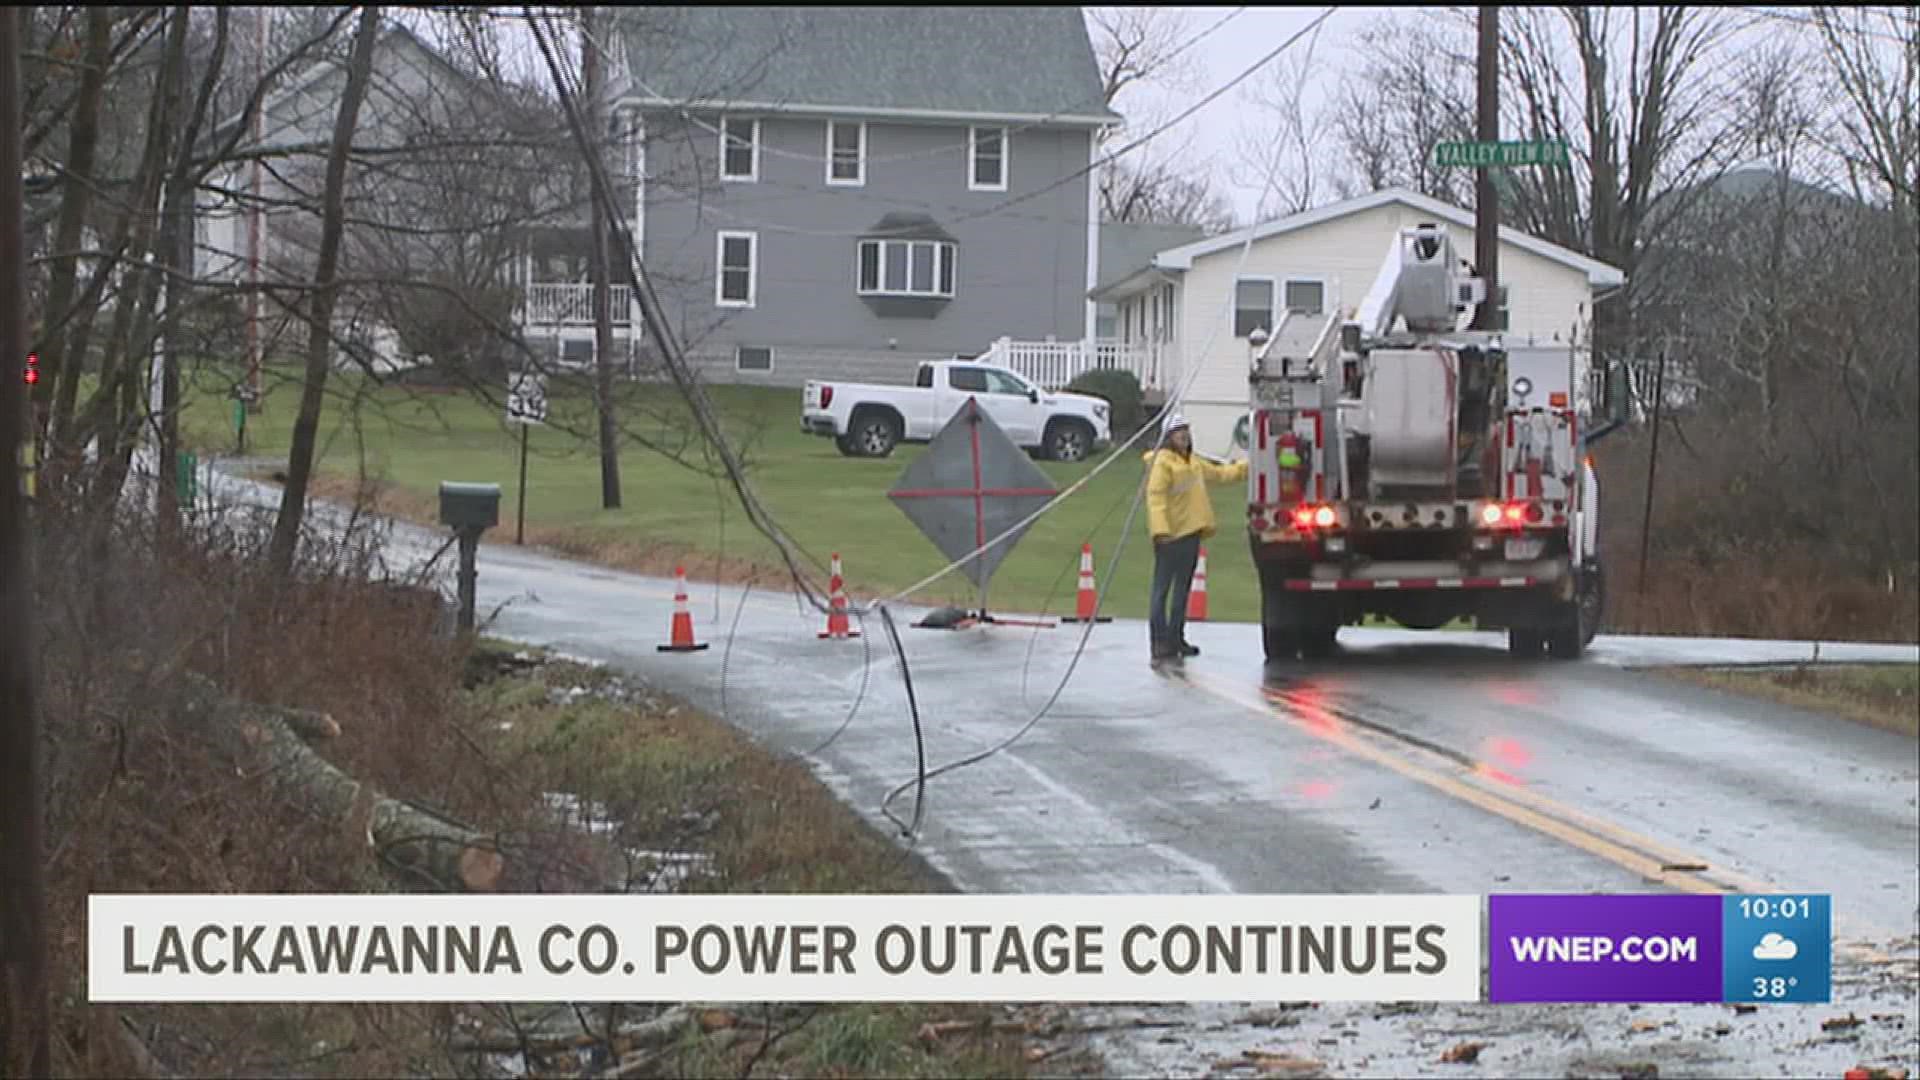 A power outage in Lackawanna county has left nearly 700 homes and businesses without electricity for hours.